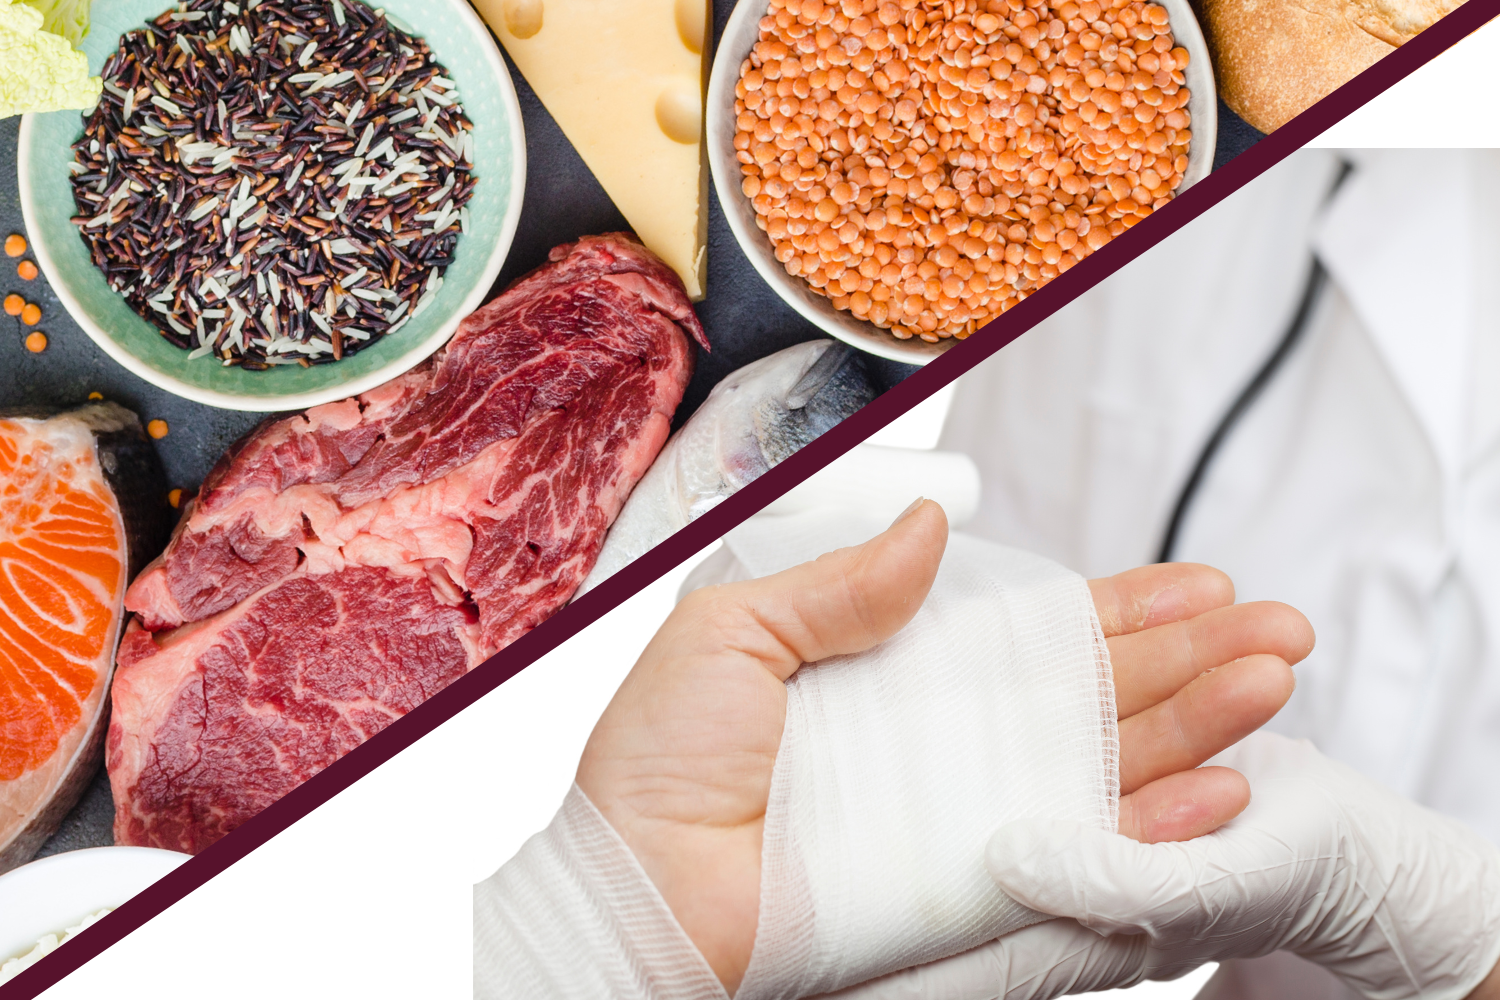 Healthy protein and grains next to a person having a wound bandaged on their hand.